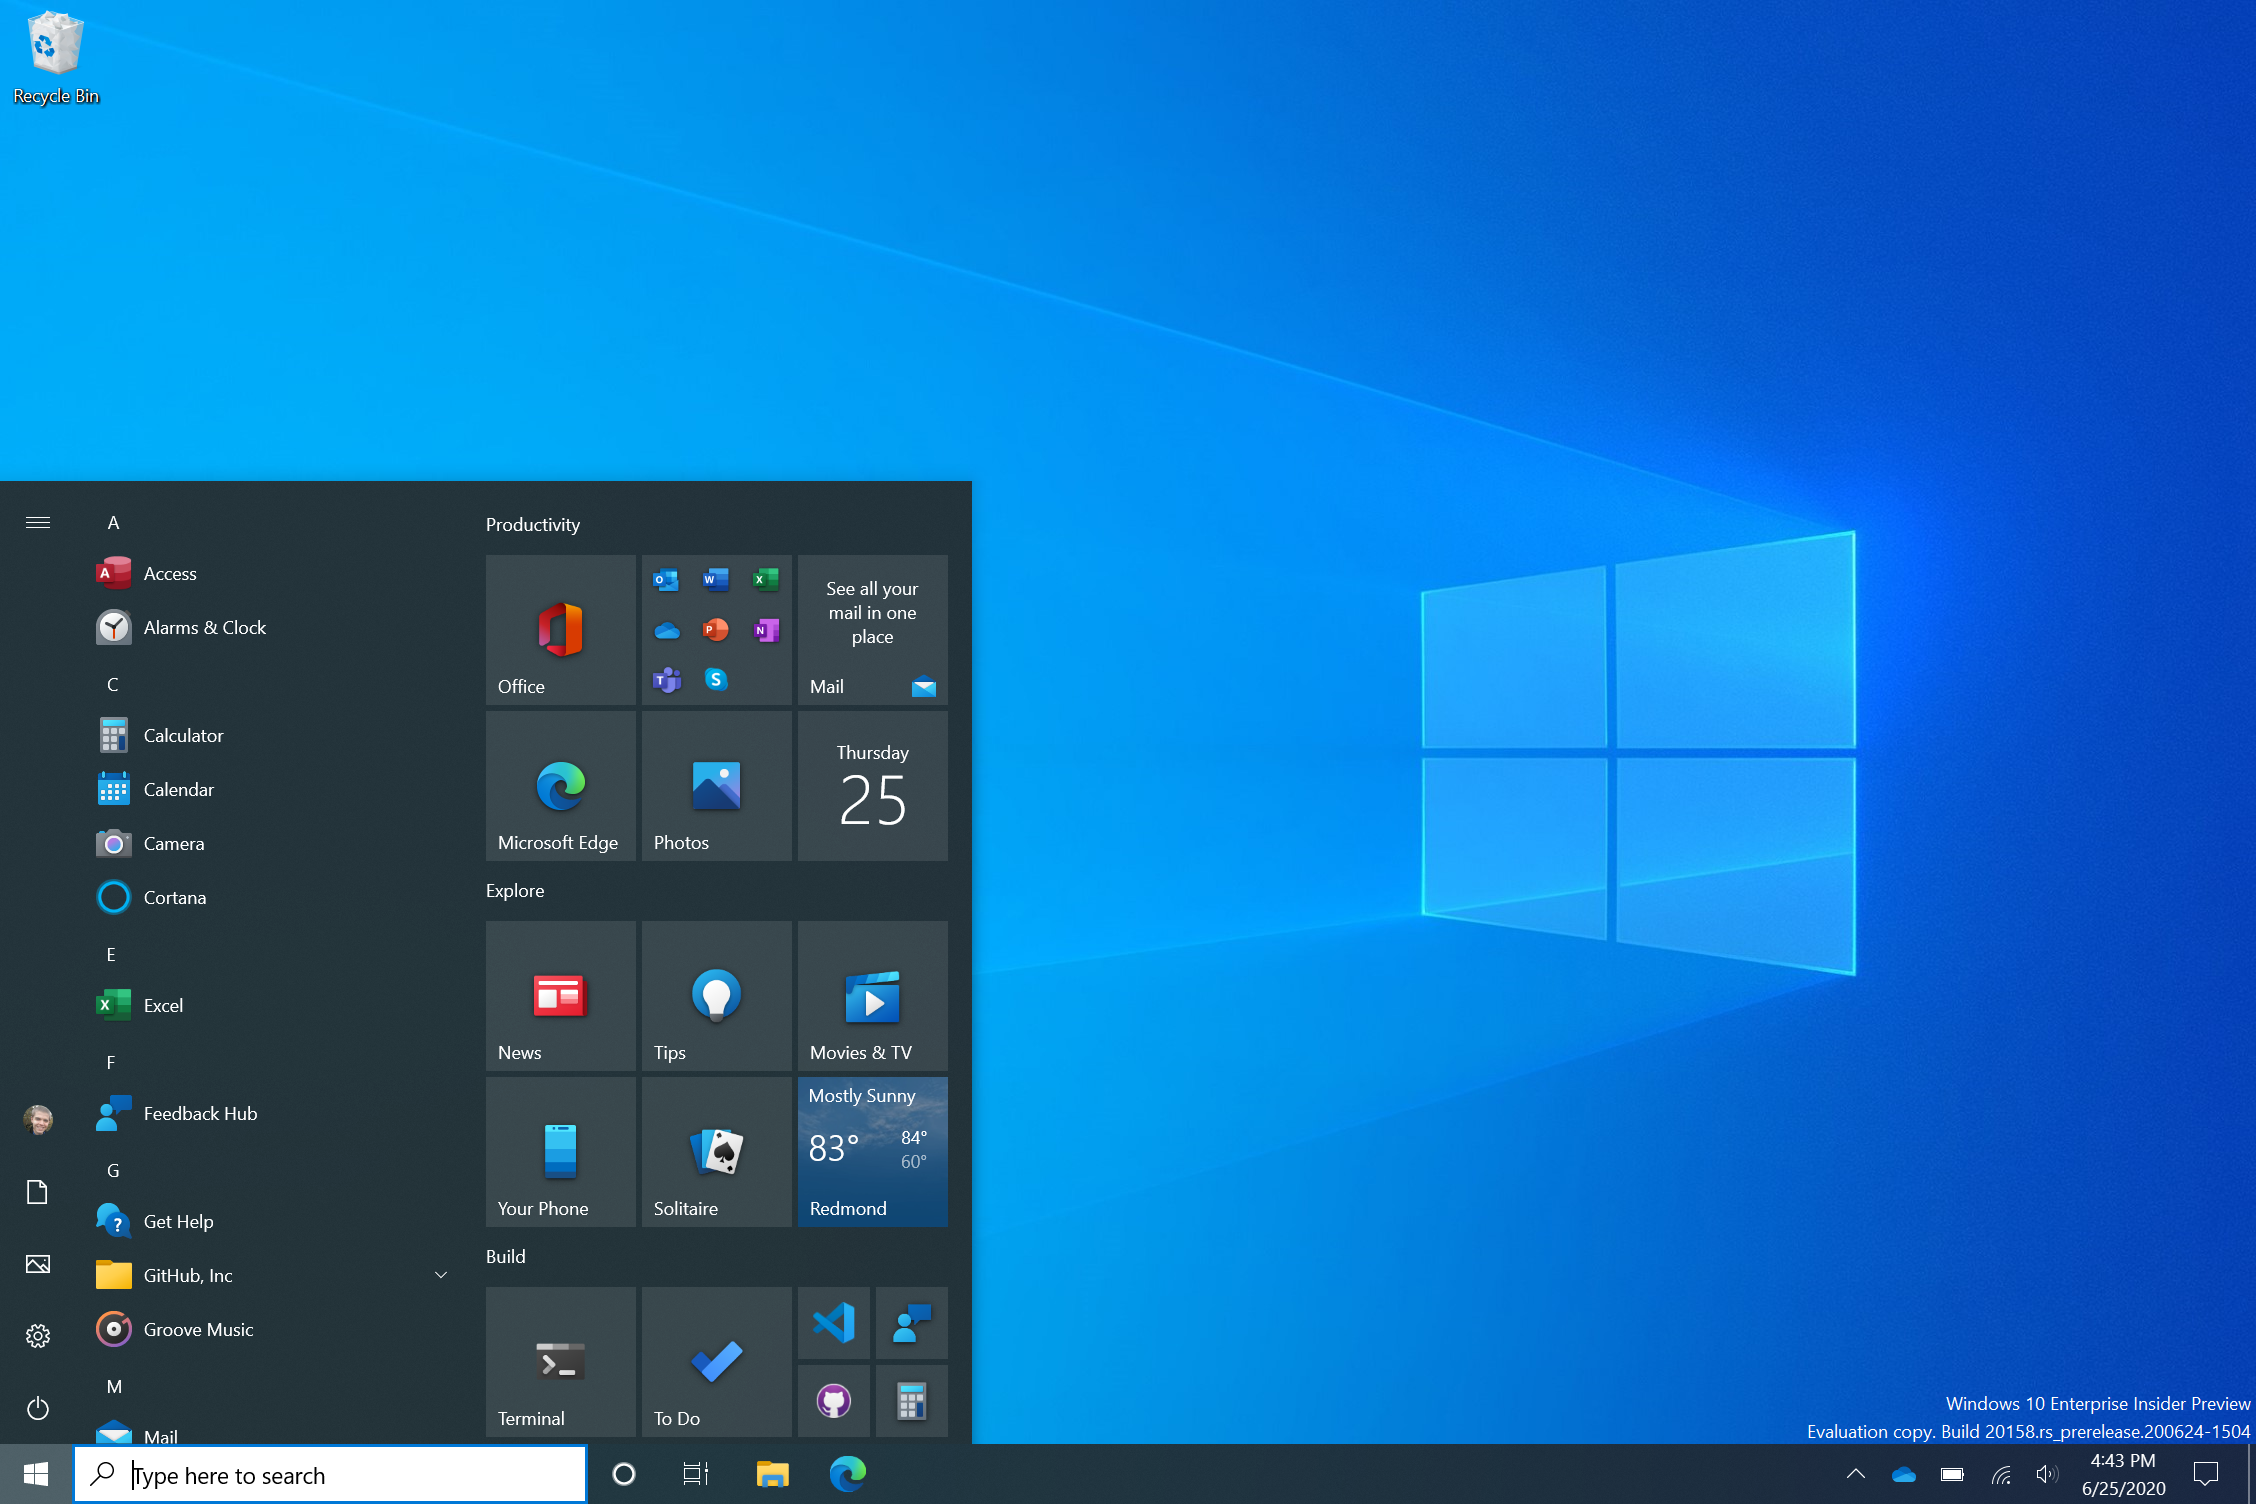 How to Enable the New Start Menu Design on Windows 10 Version 2004